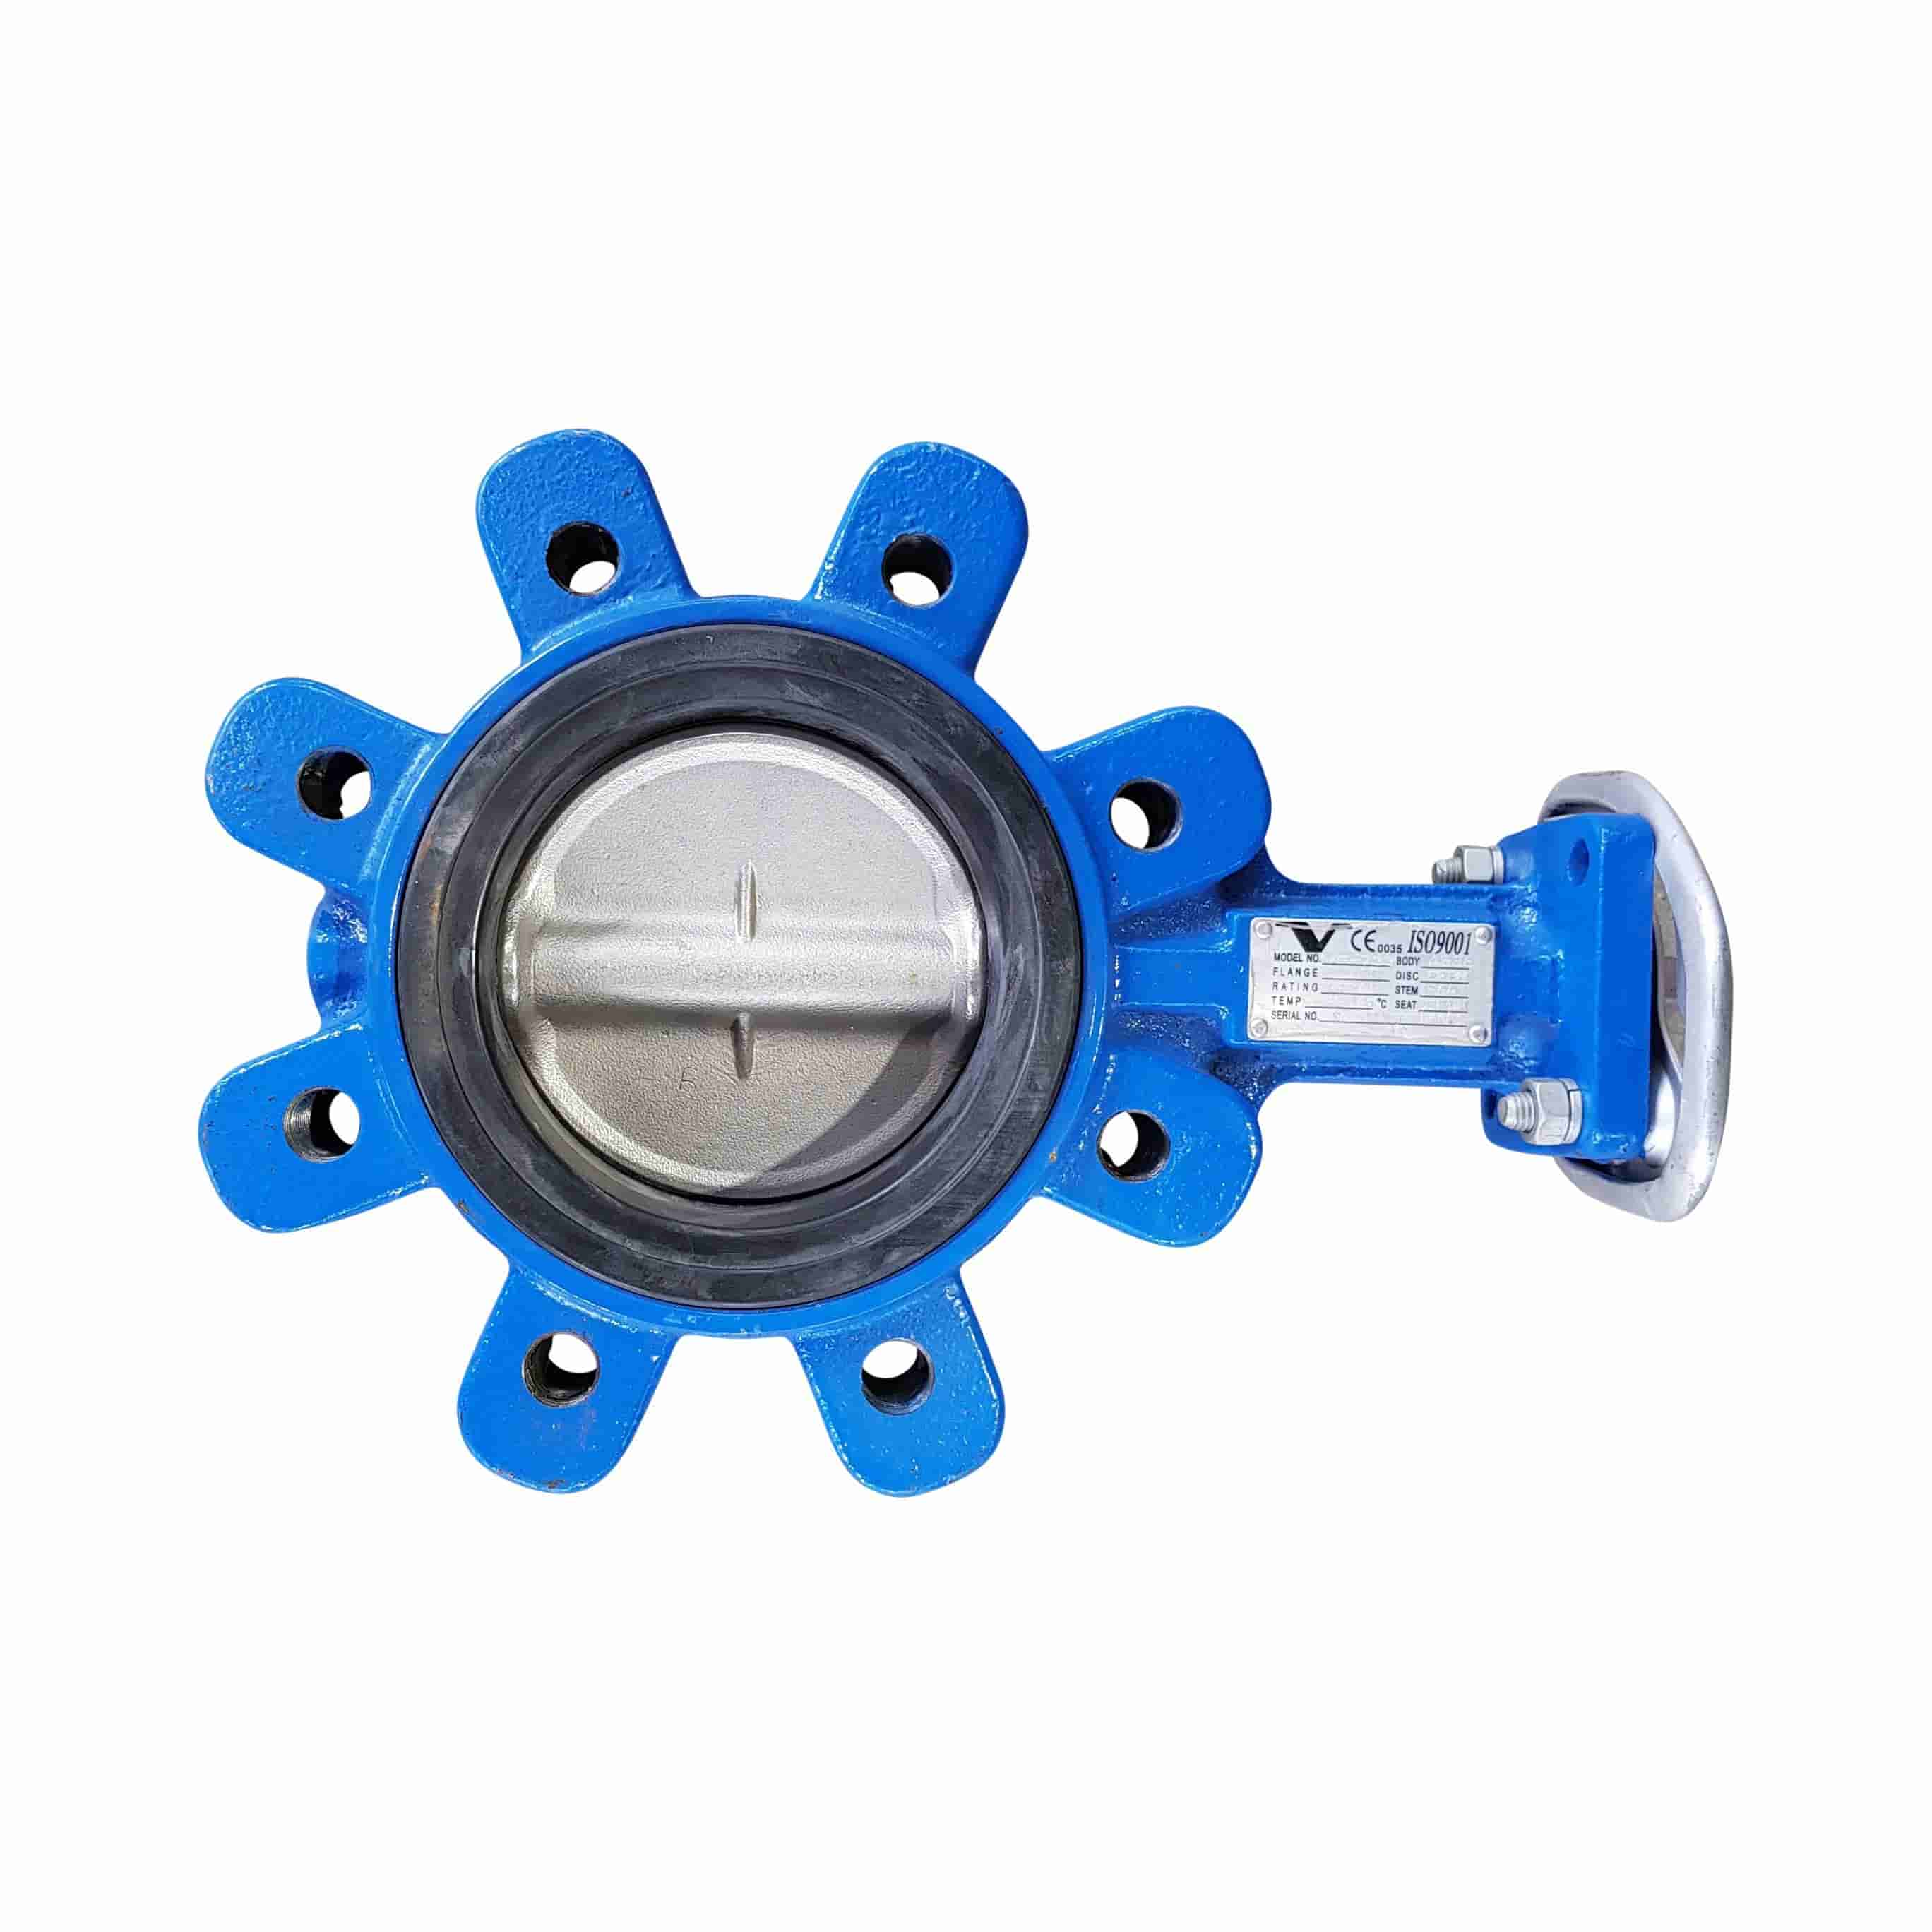 Cast iron lugged butterfly valve with stainless steel disc and threaded holes